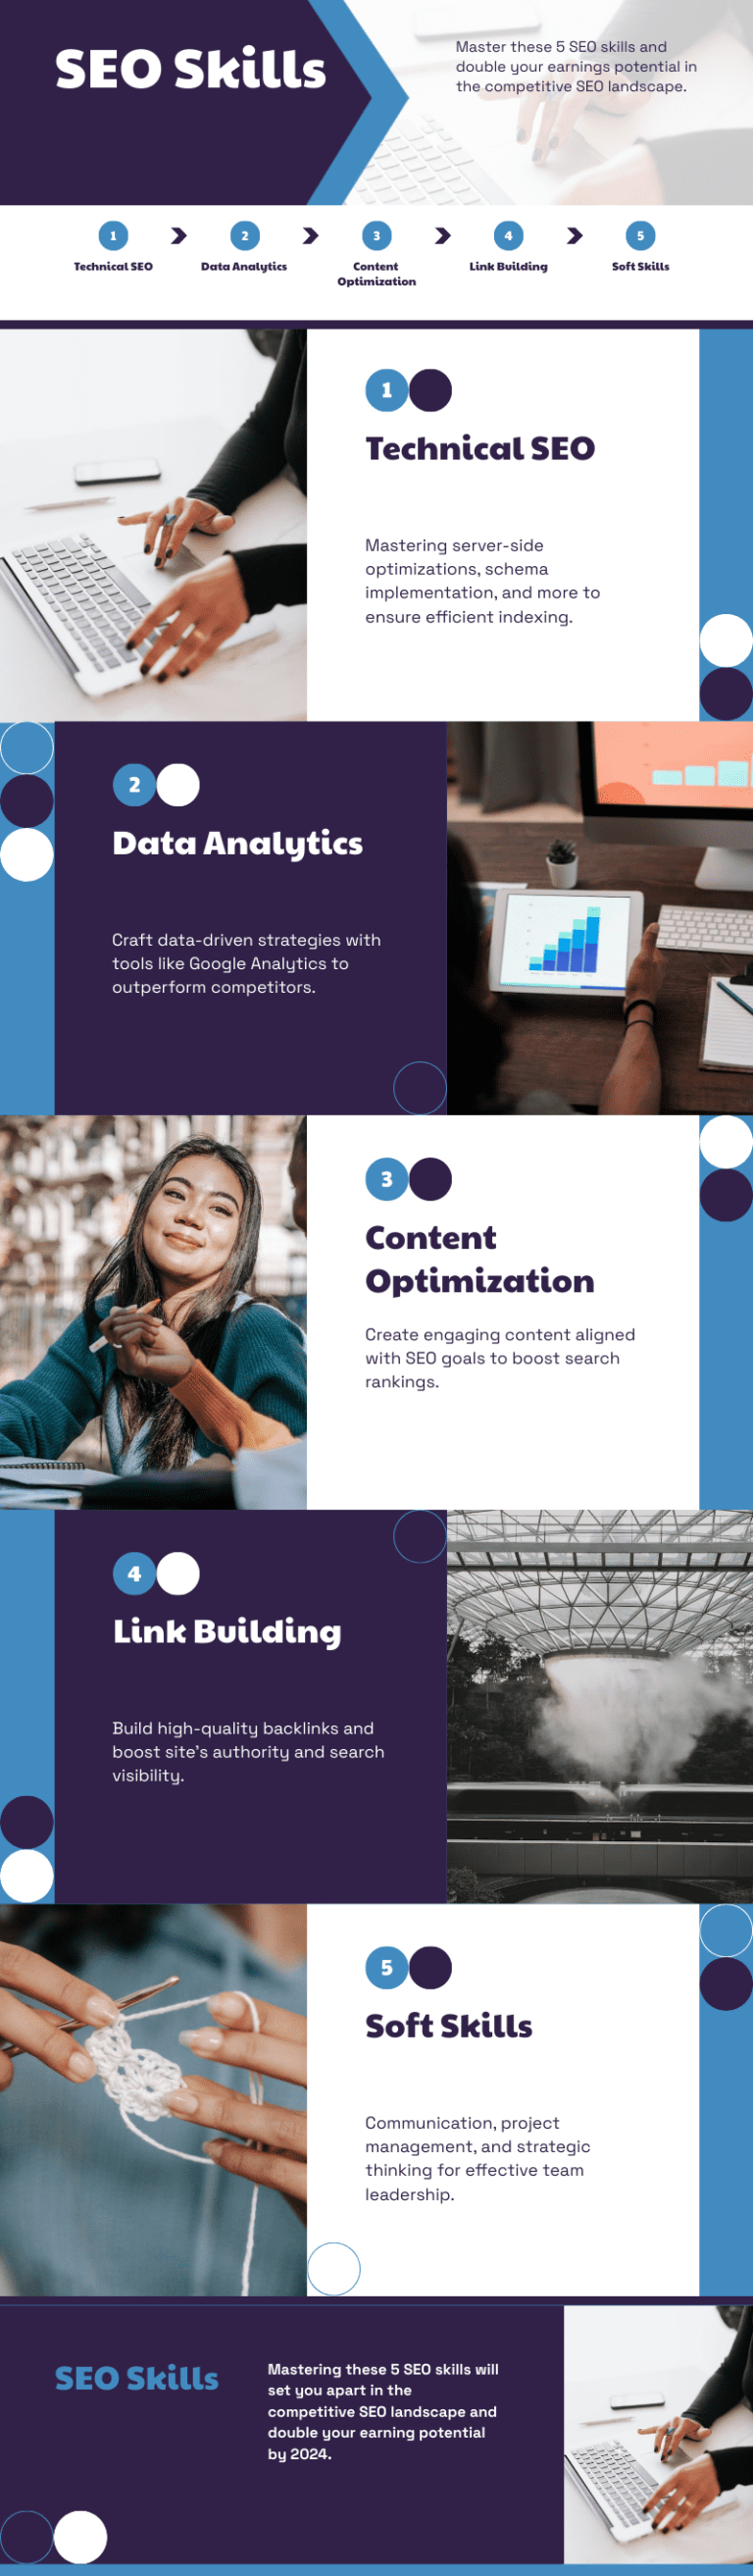 An infographic highlighting essential SEO skills necessary for SEO jobs, featuring icons and images representing technical SEO, data analytics, content optimization, link building, and soft skills.